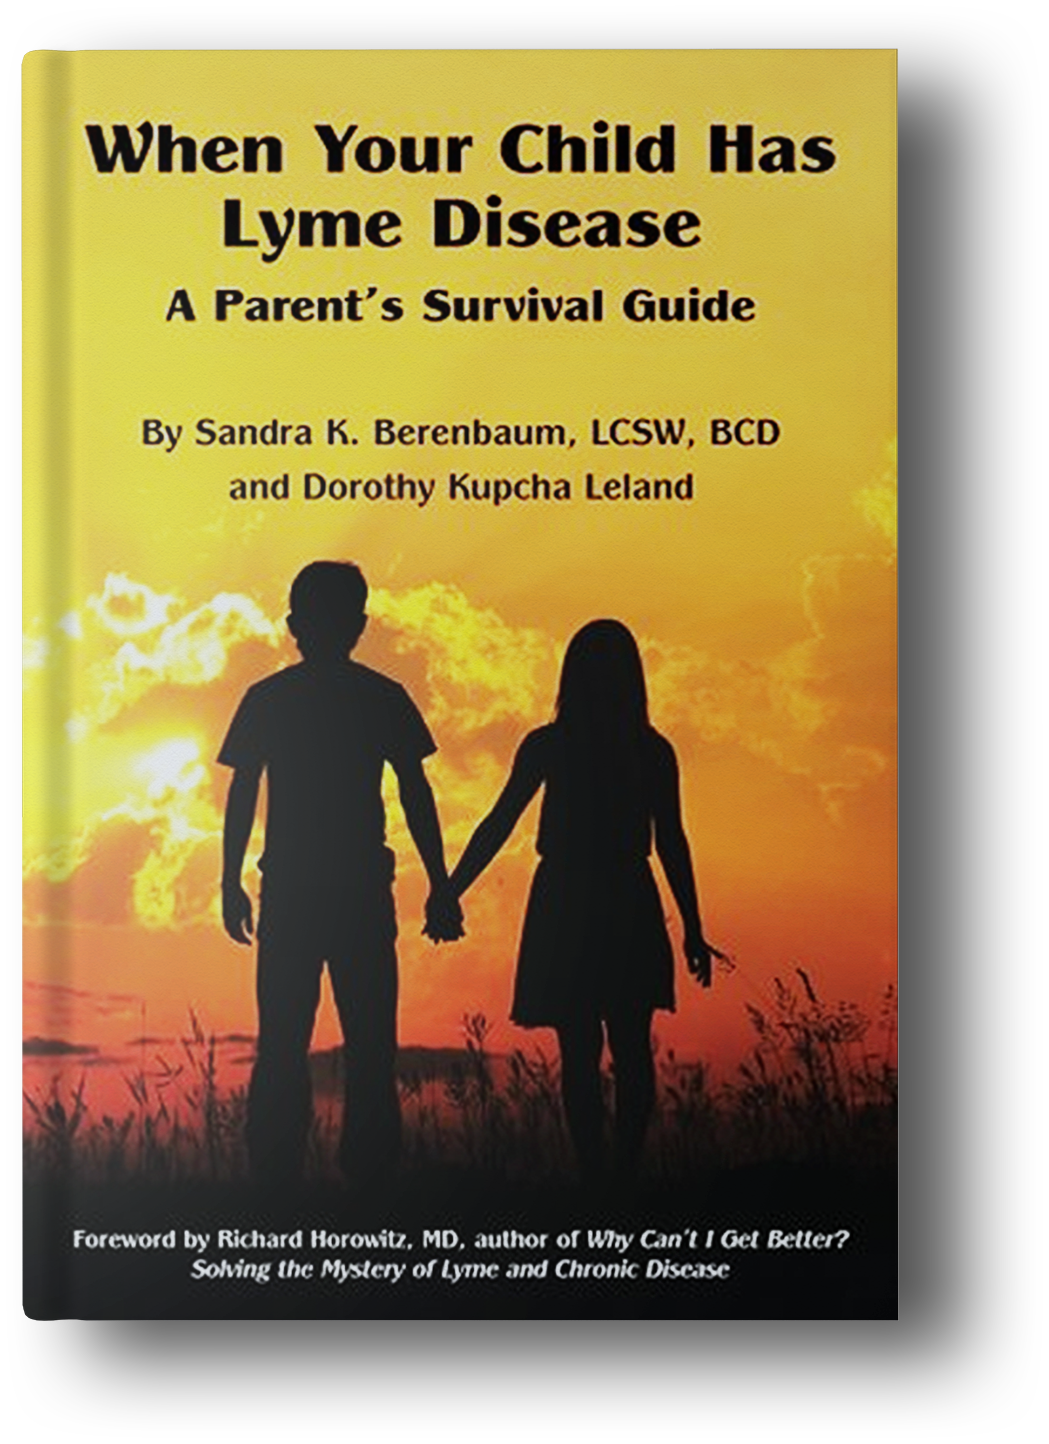 When Your Child Has Lyme Disease